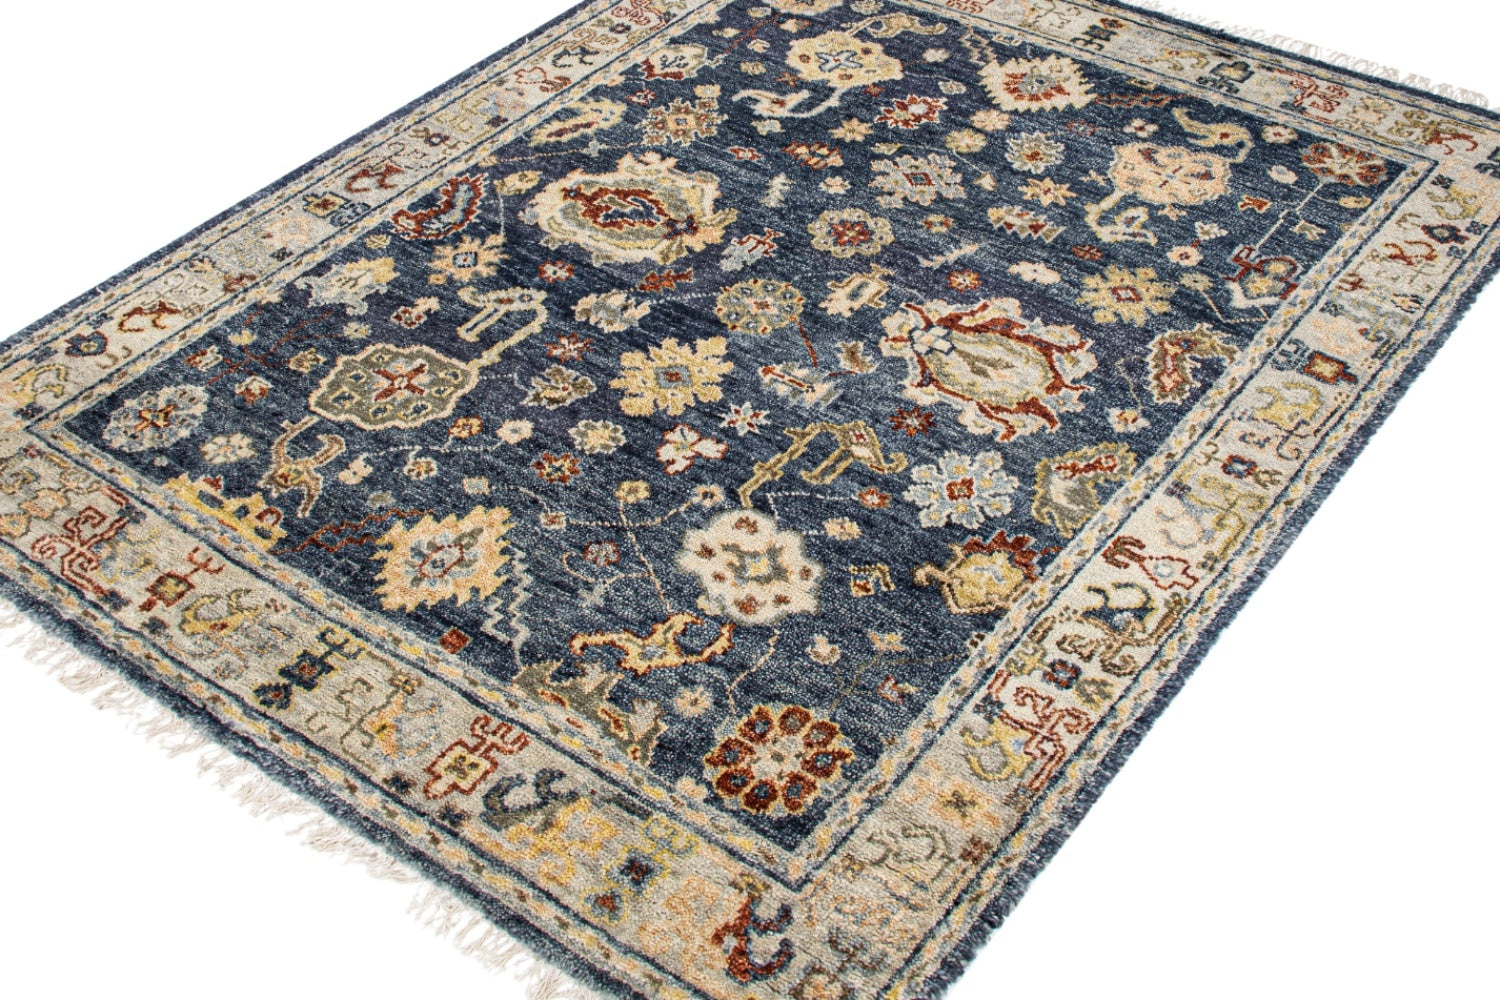 Sultanabad 4 Handwoven Traditional Rug, J72595